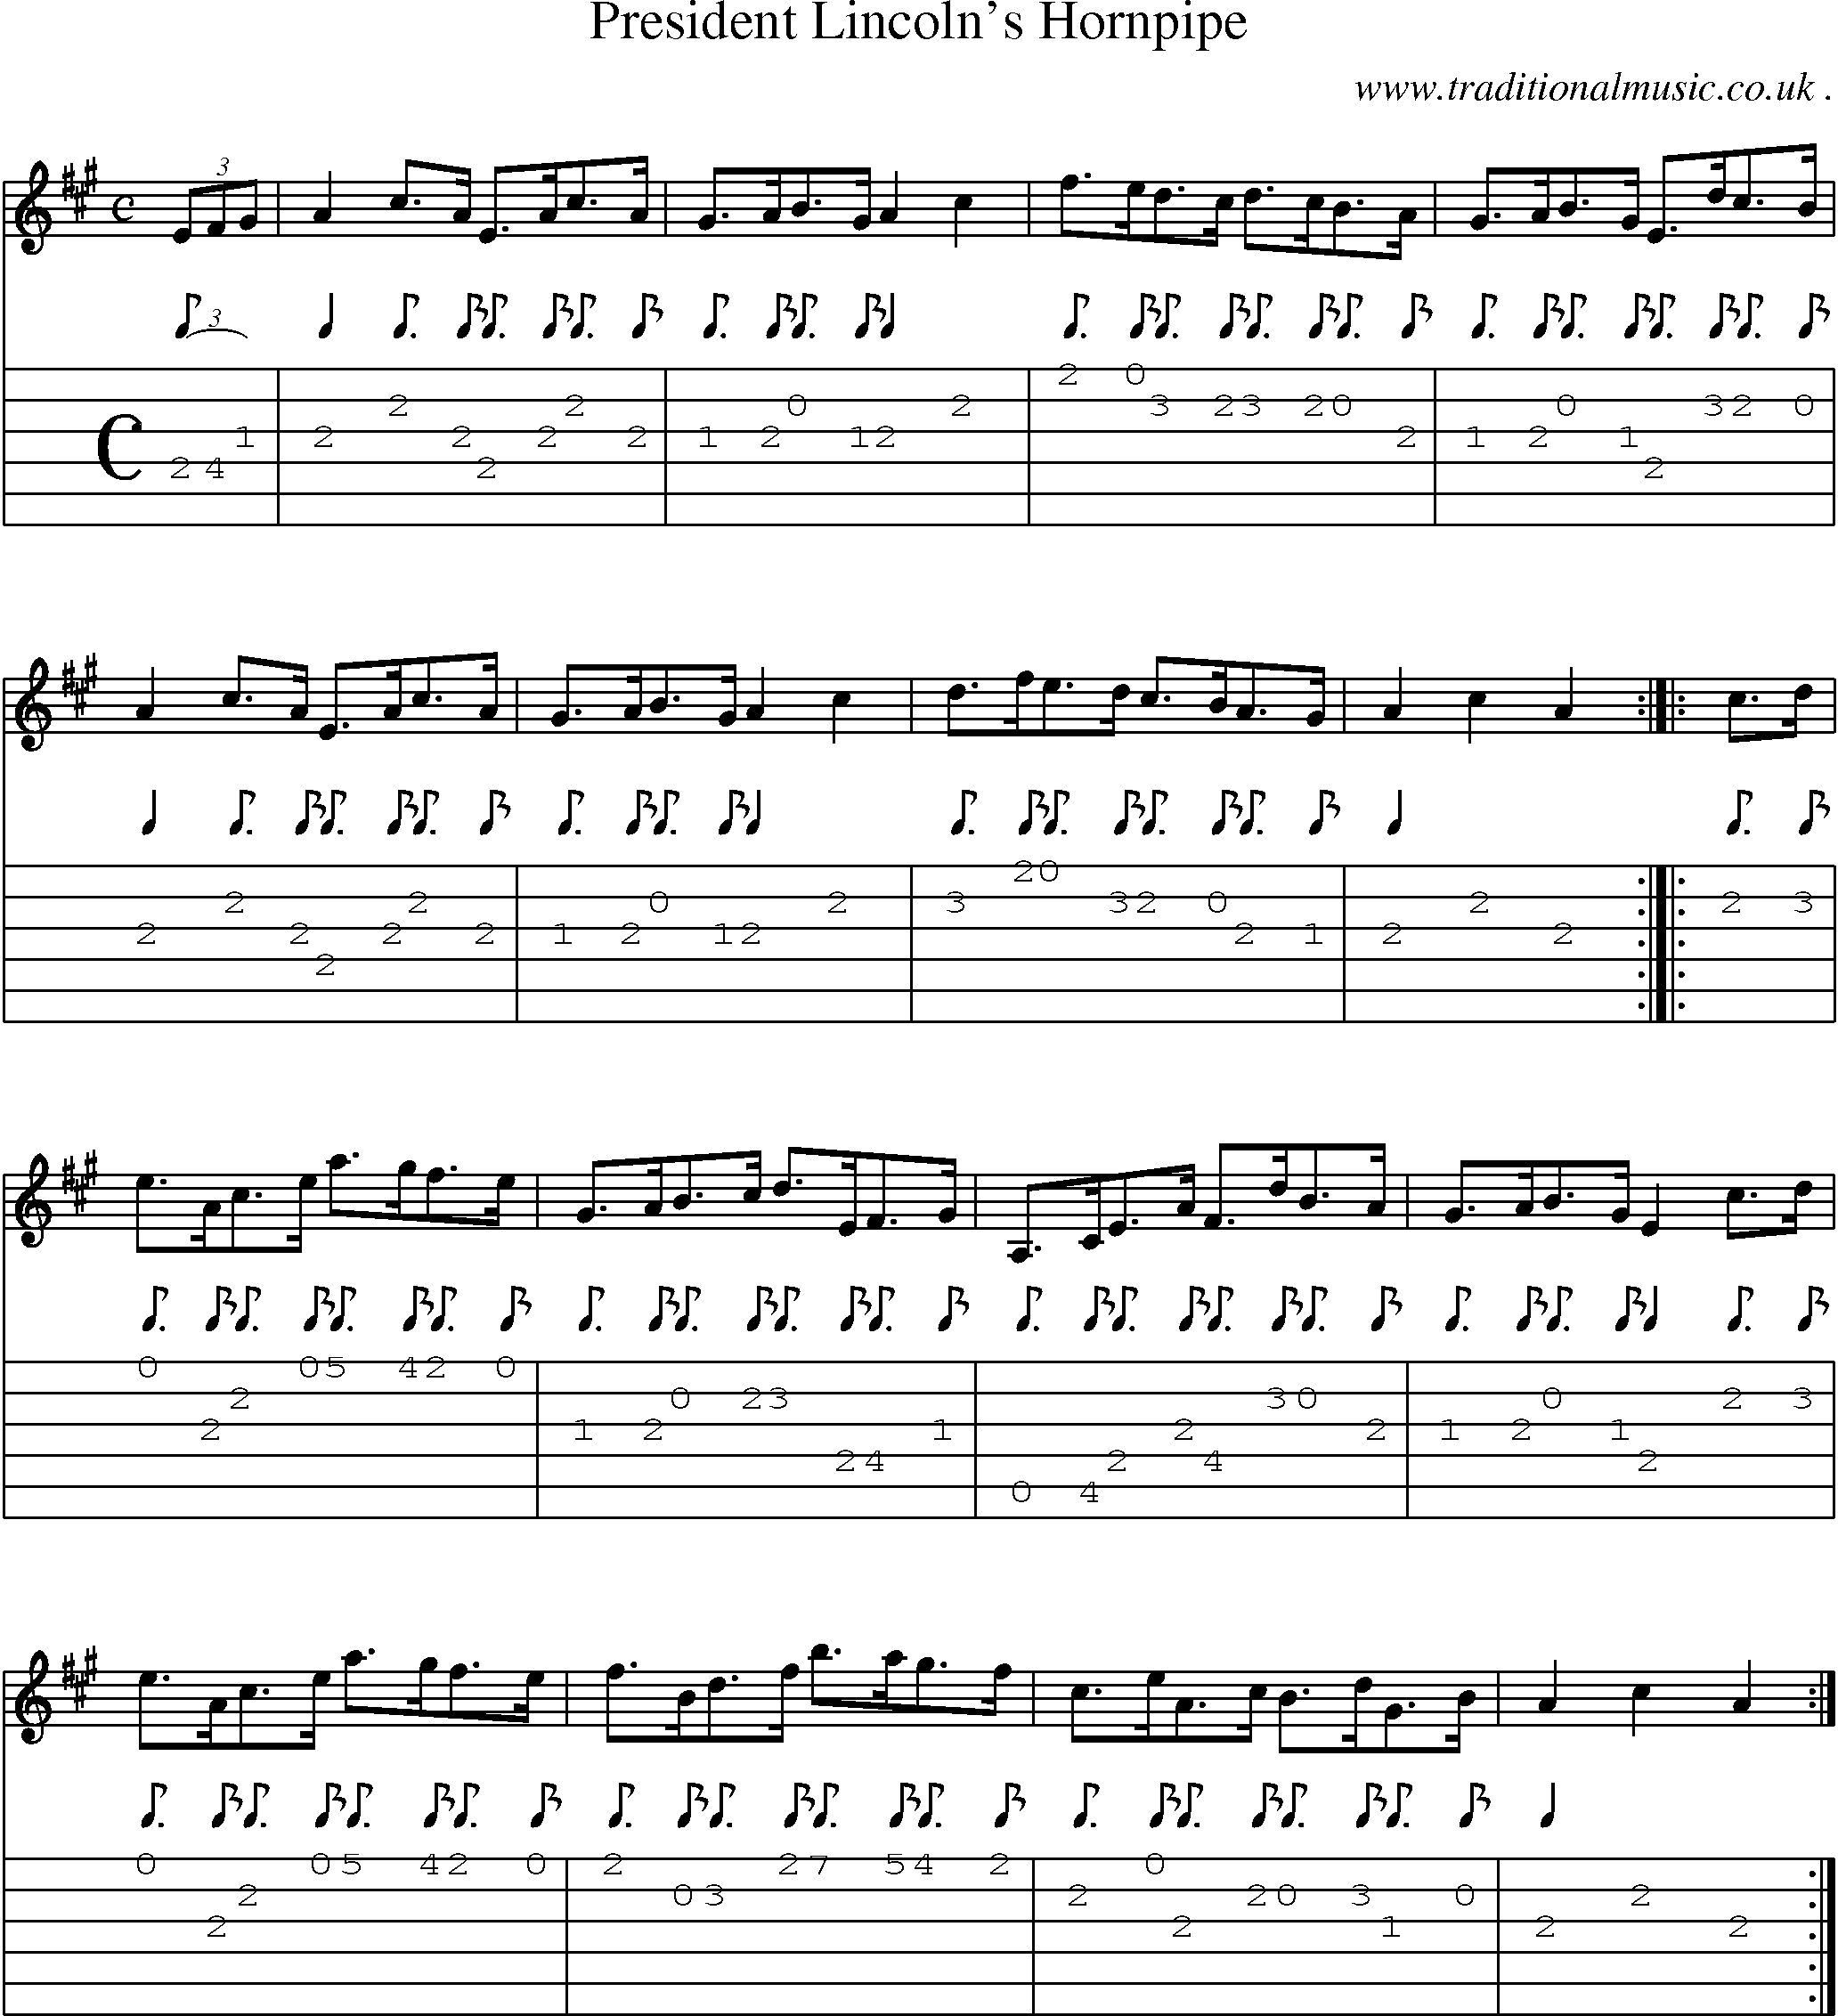 Music Score and Guitar Tabs for President Lincolns Hornpipe